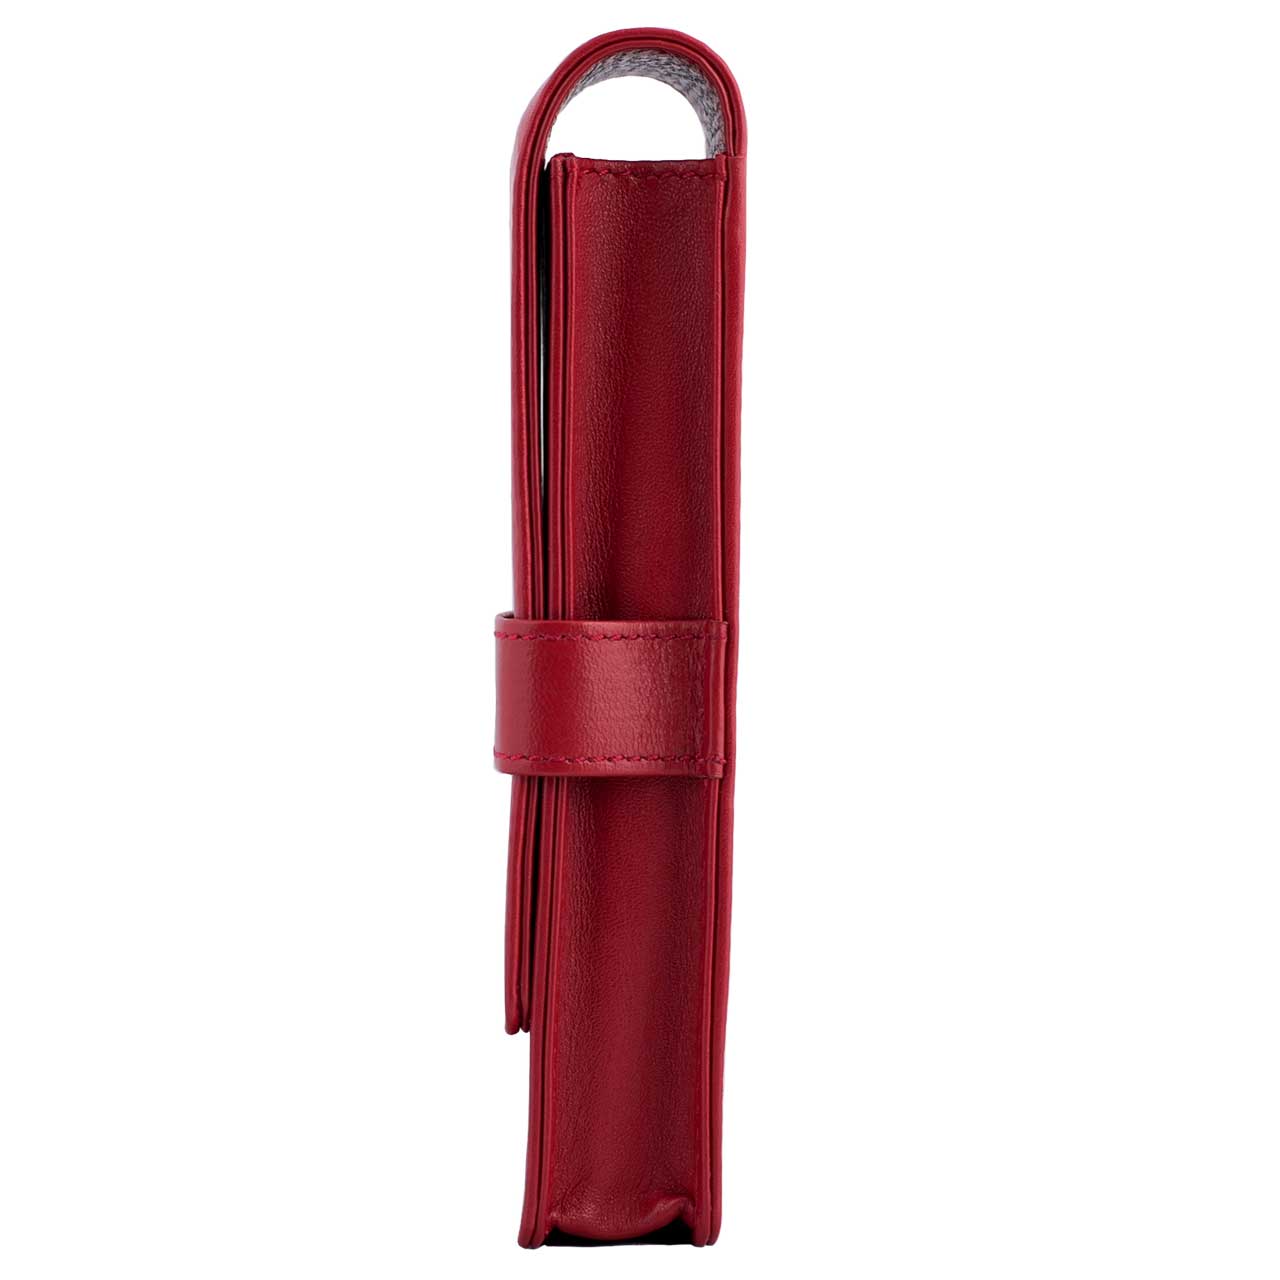 DiLoro Leather Triple Pen and Pencil Holder - Venetian Red Side 3